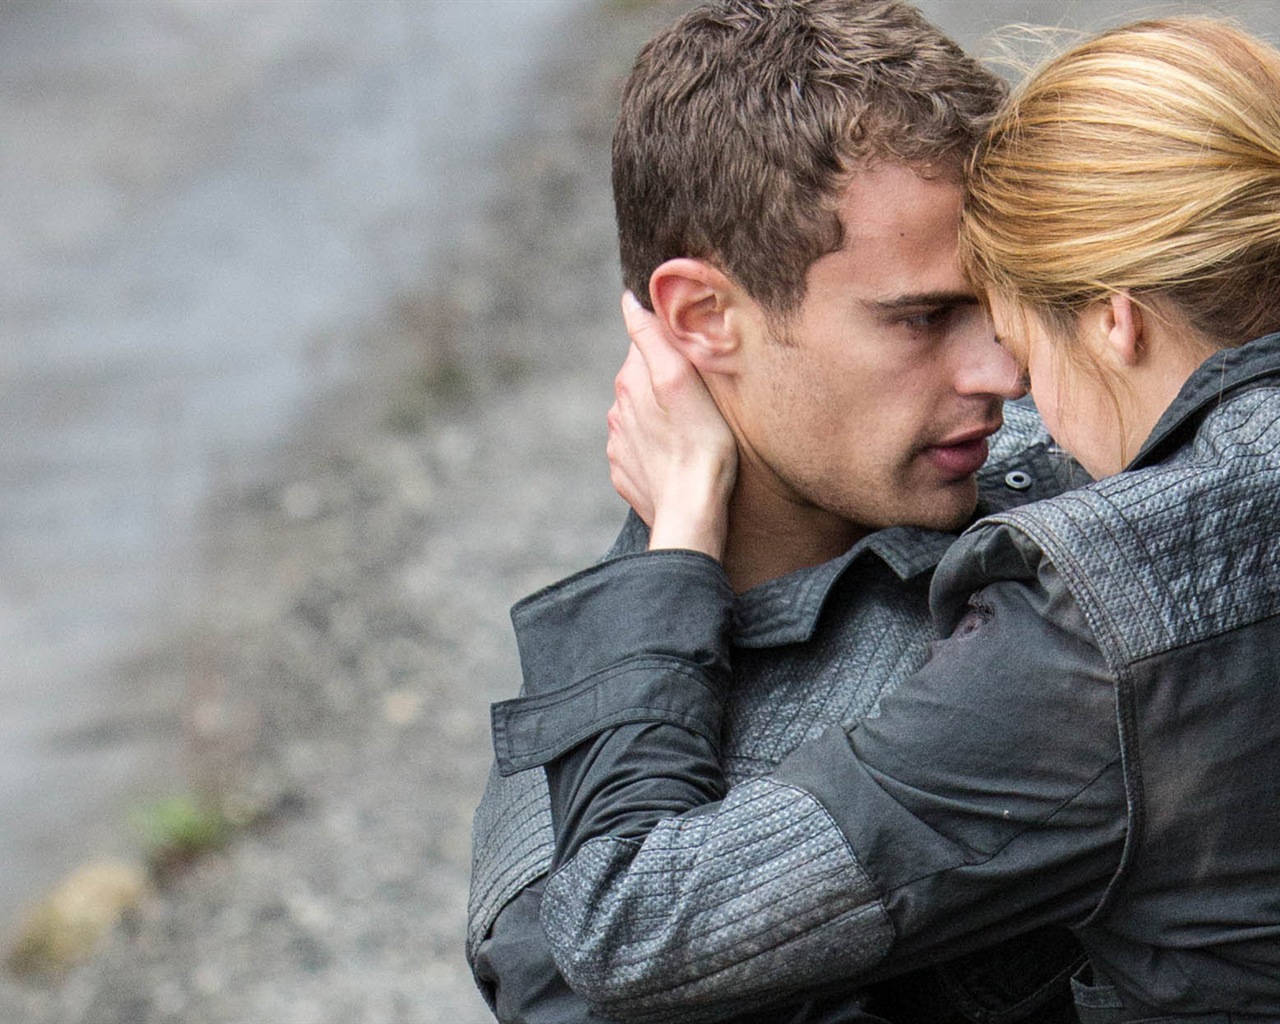 Divergent movie HD wallpapers #12 - 1280x1024